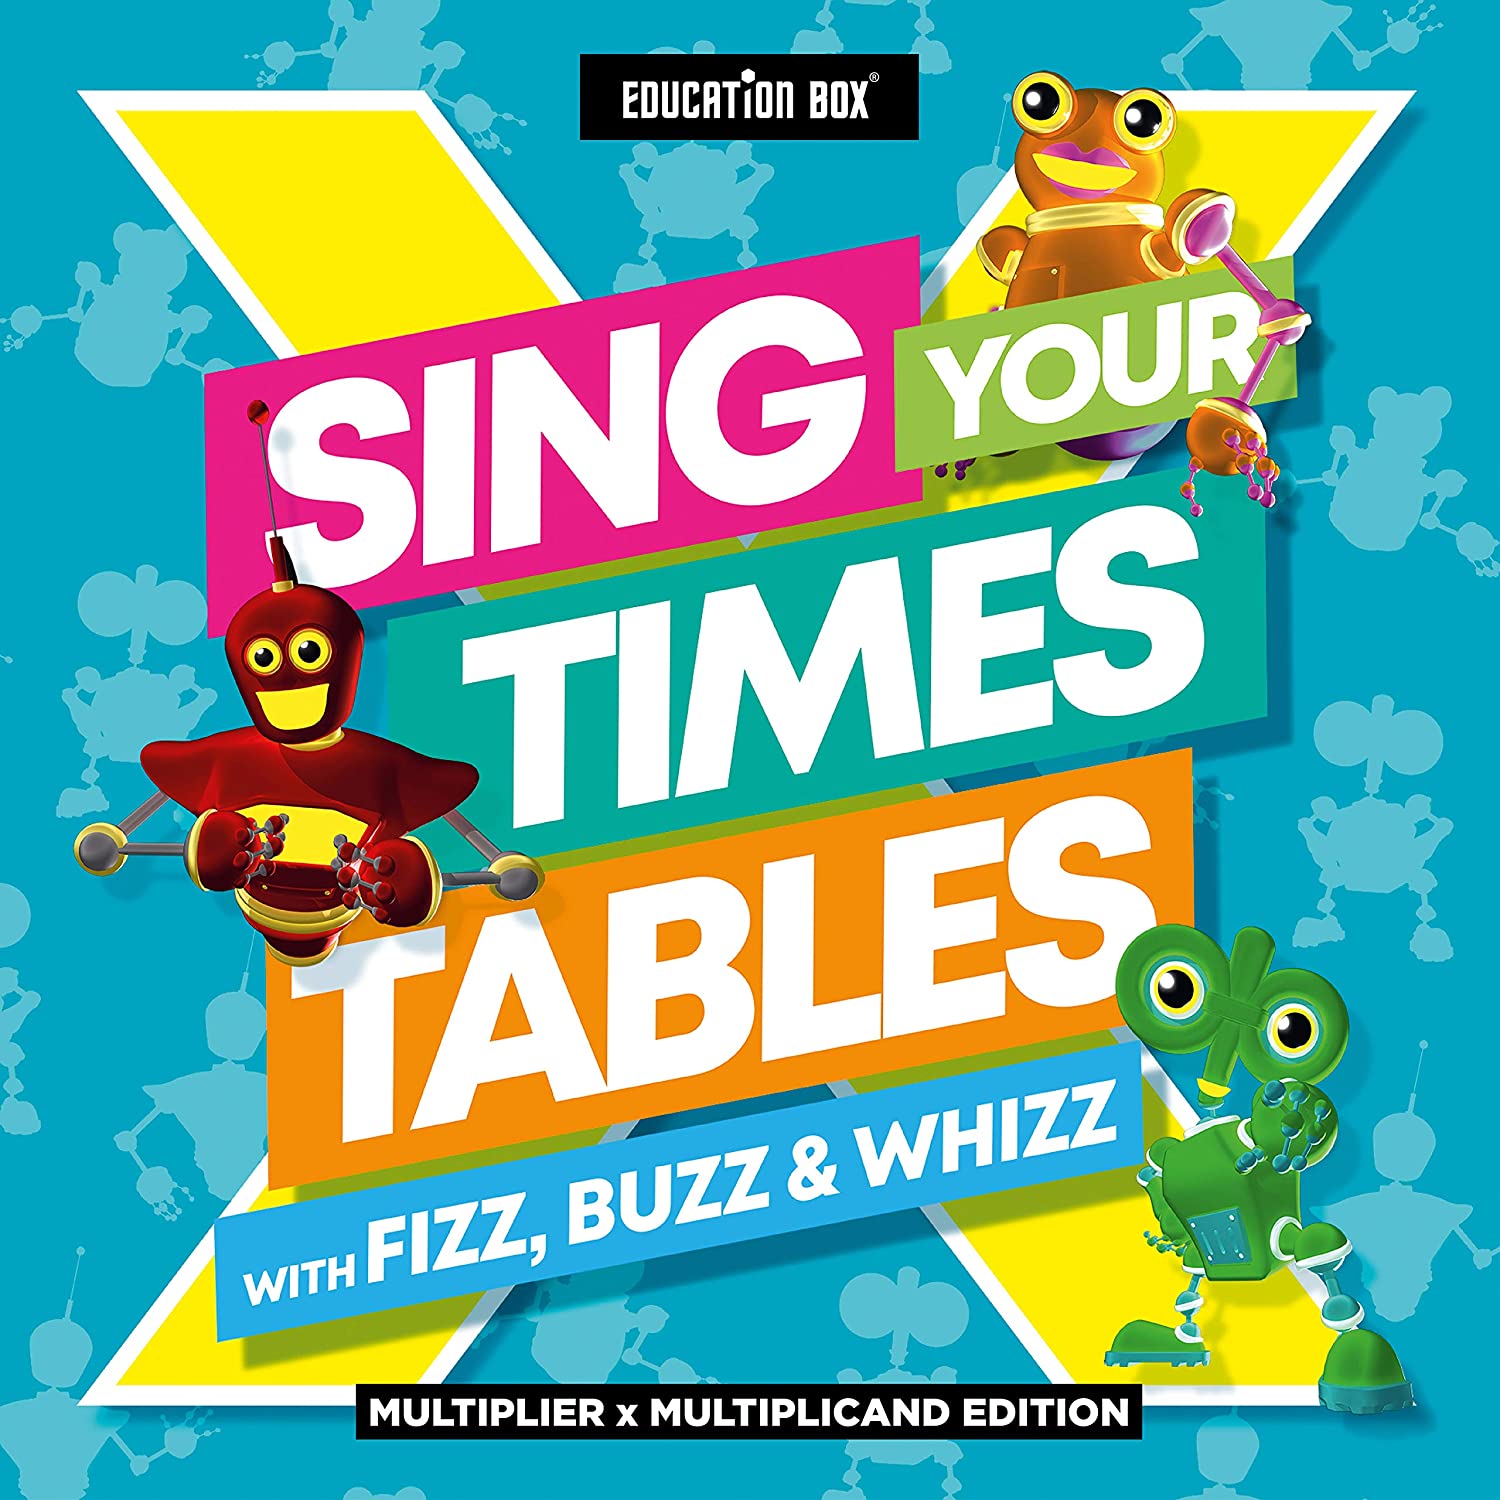 Sing Your Times Tables: Fizz Buzz & Whizz (Education)